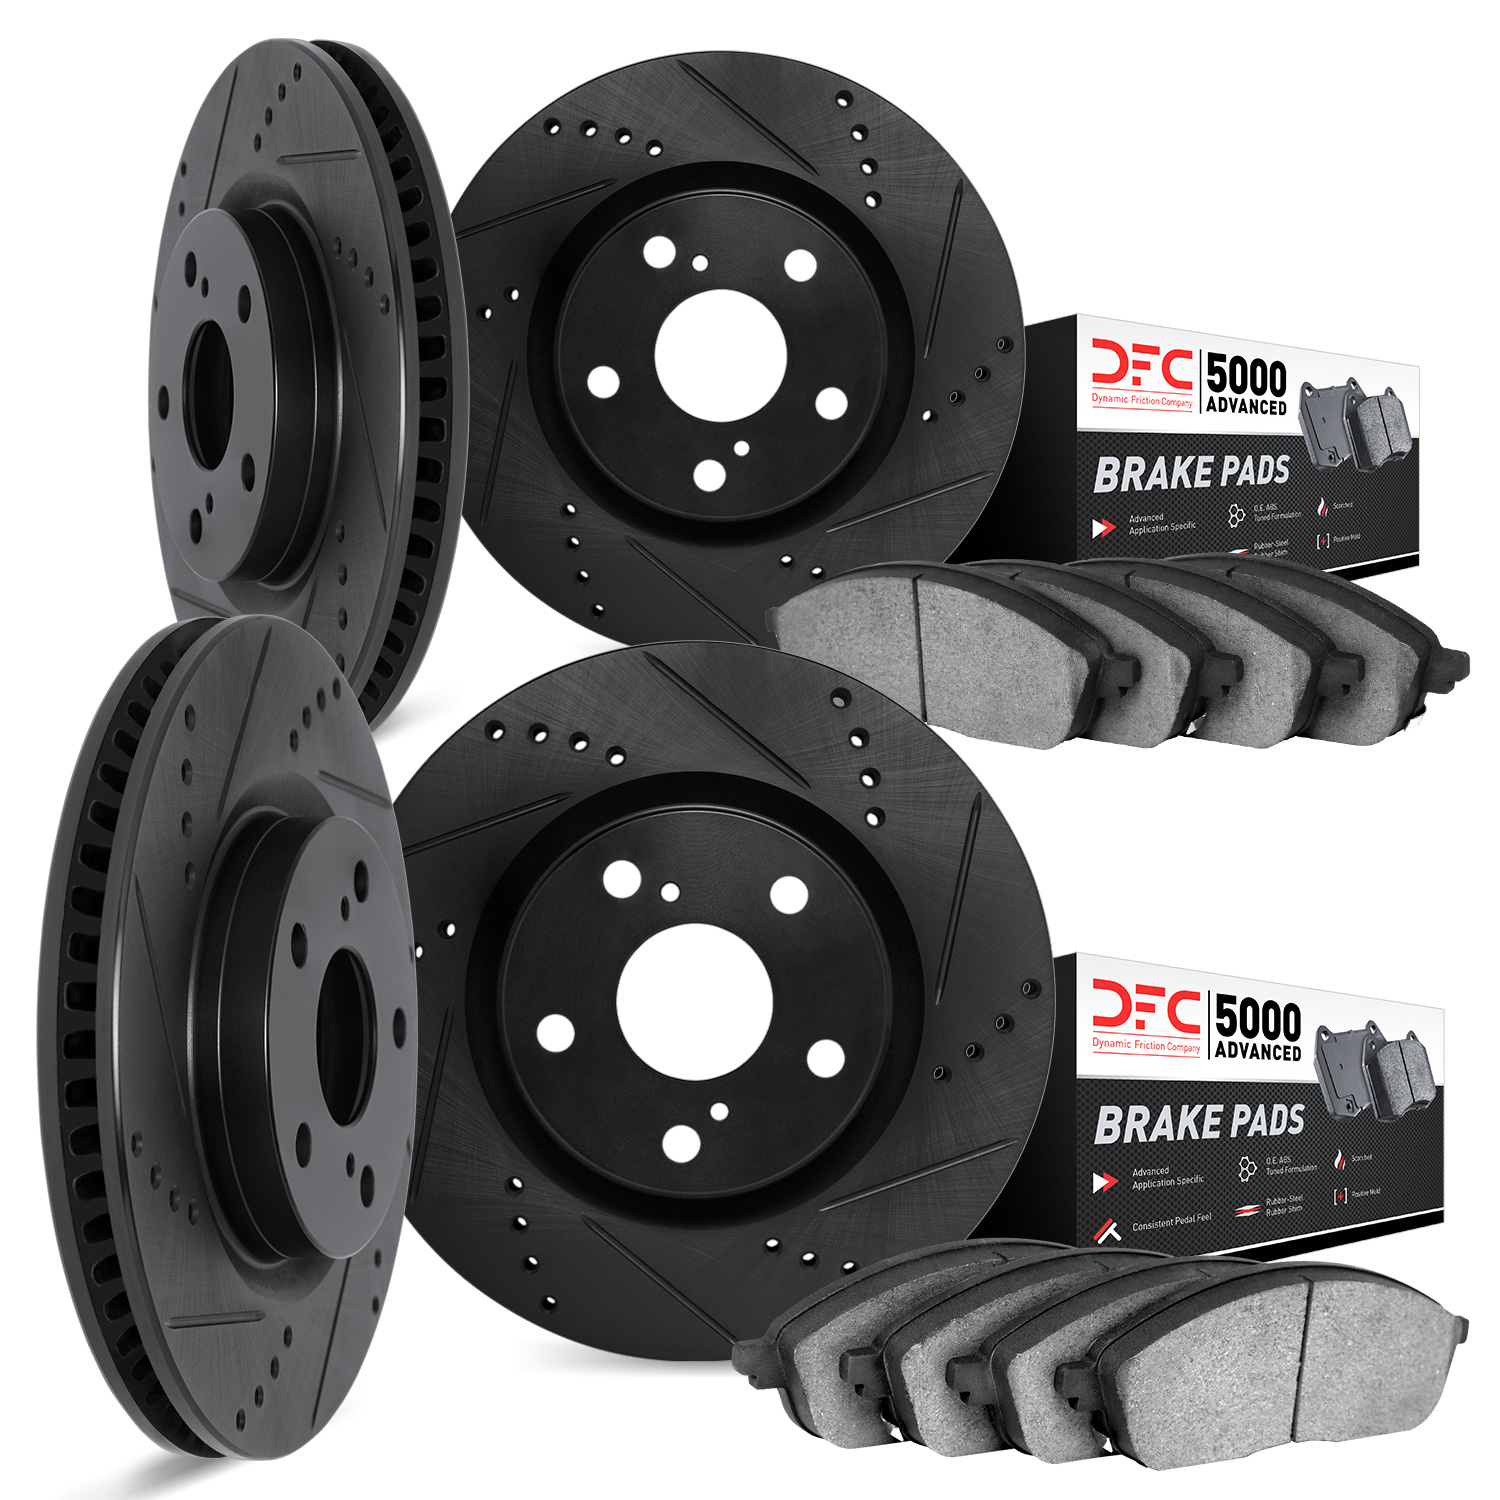 8504-67102 Drilled/Slotted Brake Rotors w/5000 Advanced Brake Pads Kit [Black], 2006-2020 Infiniti/Nissan, Position: Front and R